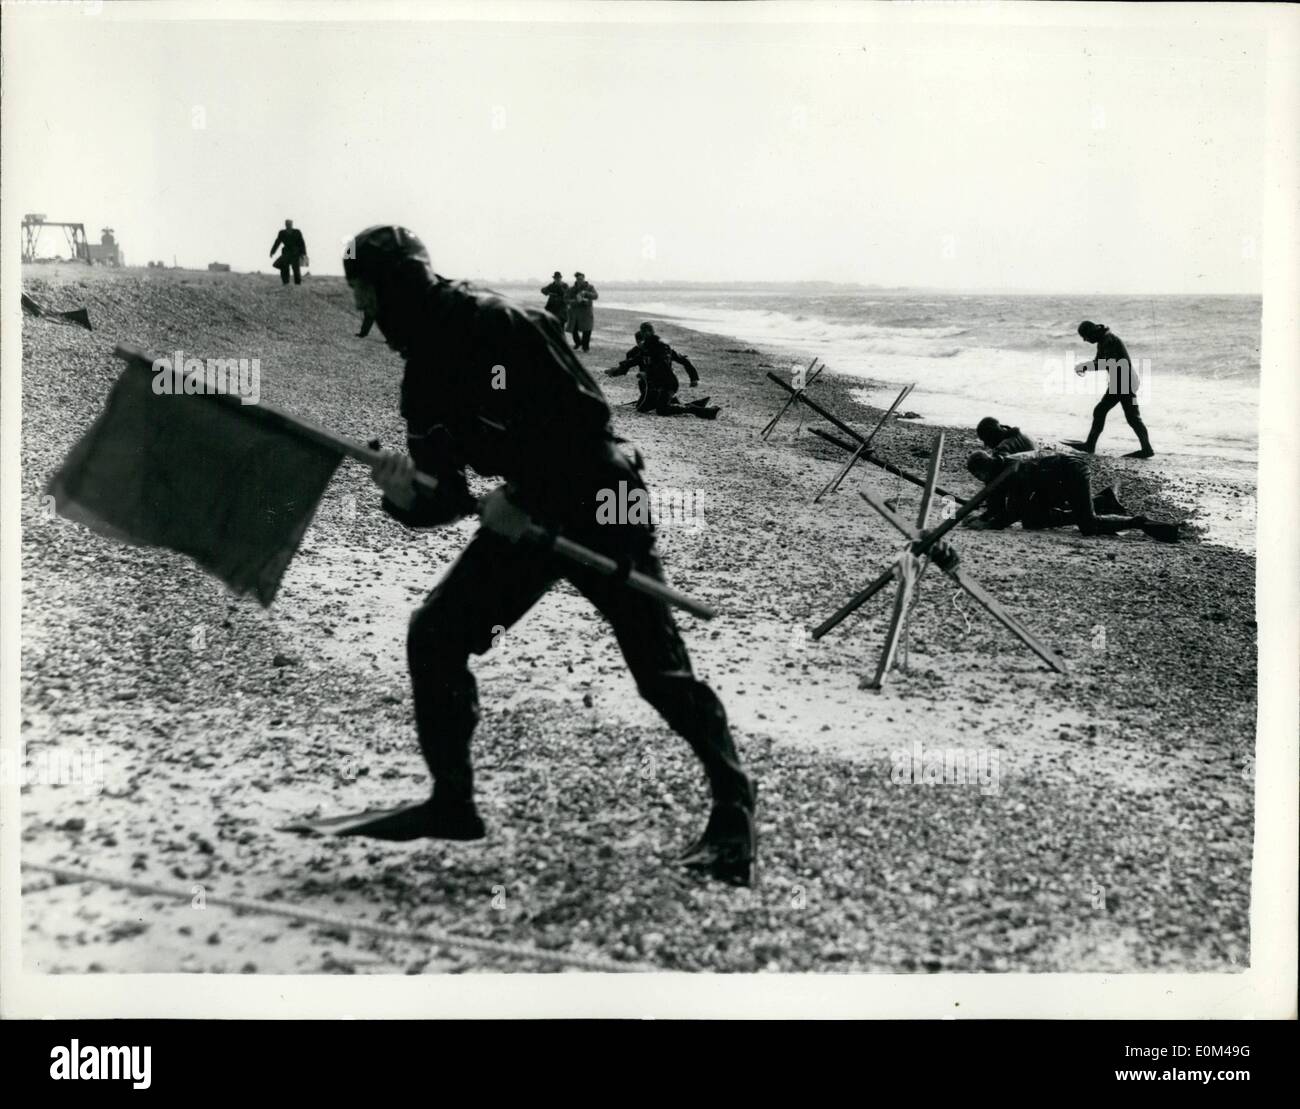 May 05, 1953 - Three services ''invasion'' demonstration: A powerful invasion force made up of Royal Marines and units of the Regular and Territorial Army including a battalion of the Gloucestershire Regiment, were put ashore from ships of the Royal Navy on the beaches at Eastney, Southsea, in the course of ''Demonstration Ruethnicund IV''. The exercise has been planned to illustrate the entite technique of amphibious assault from the preliminary reconnaissance stages, through the attack against prepared defence positions to the ultimate consolidation of ground won by the invaders Stock Photo